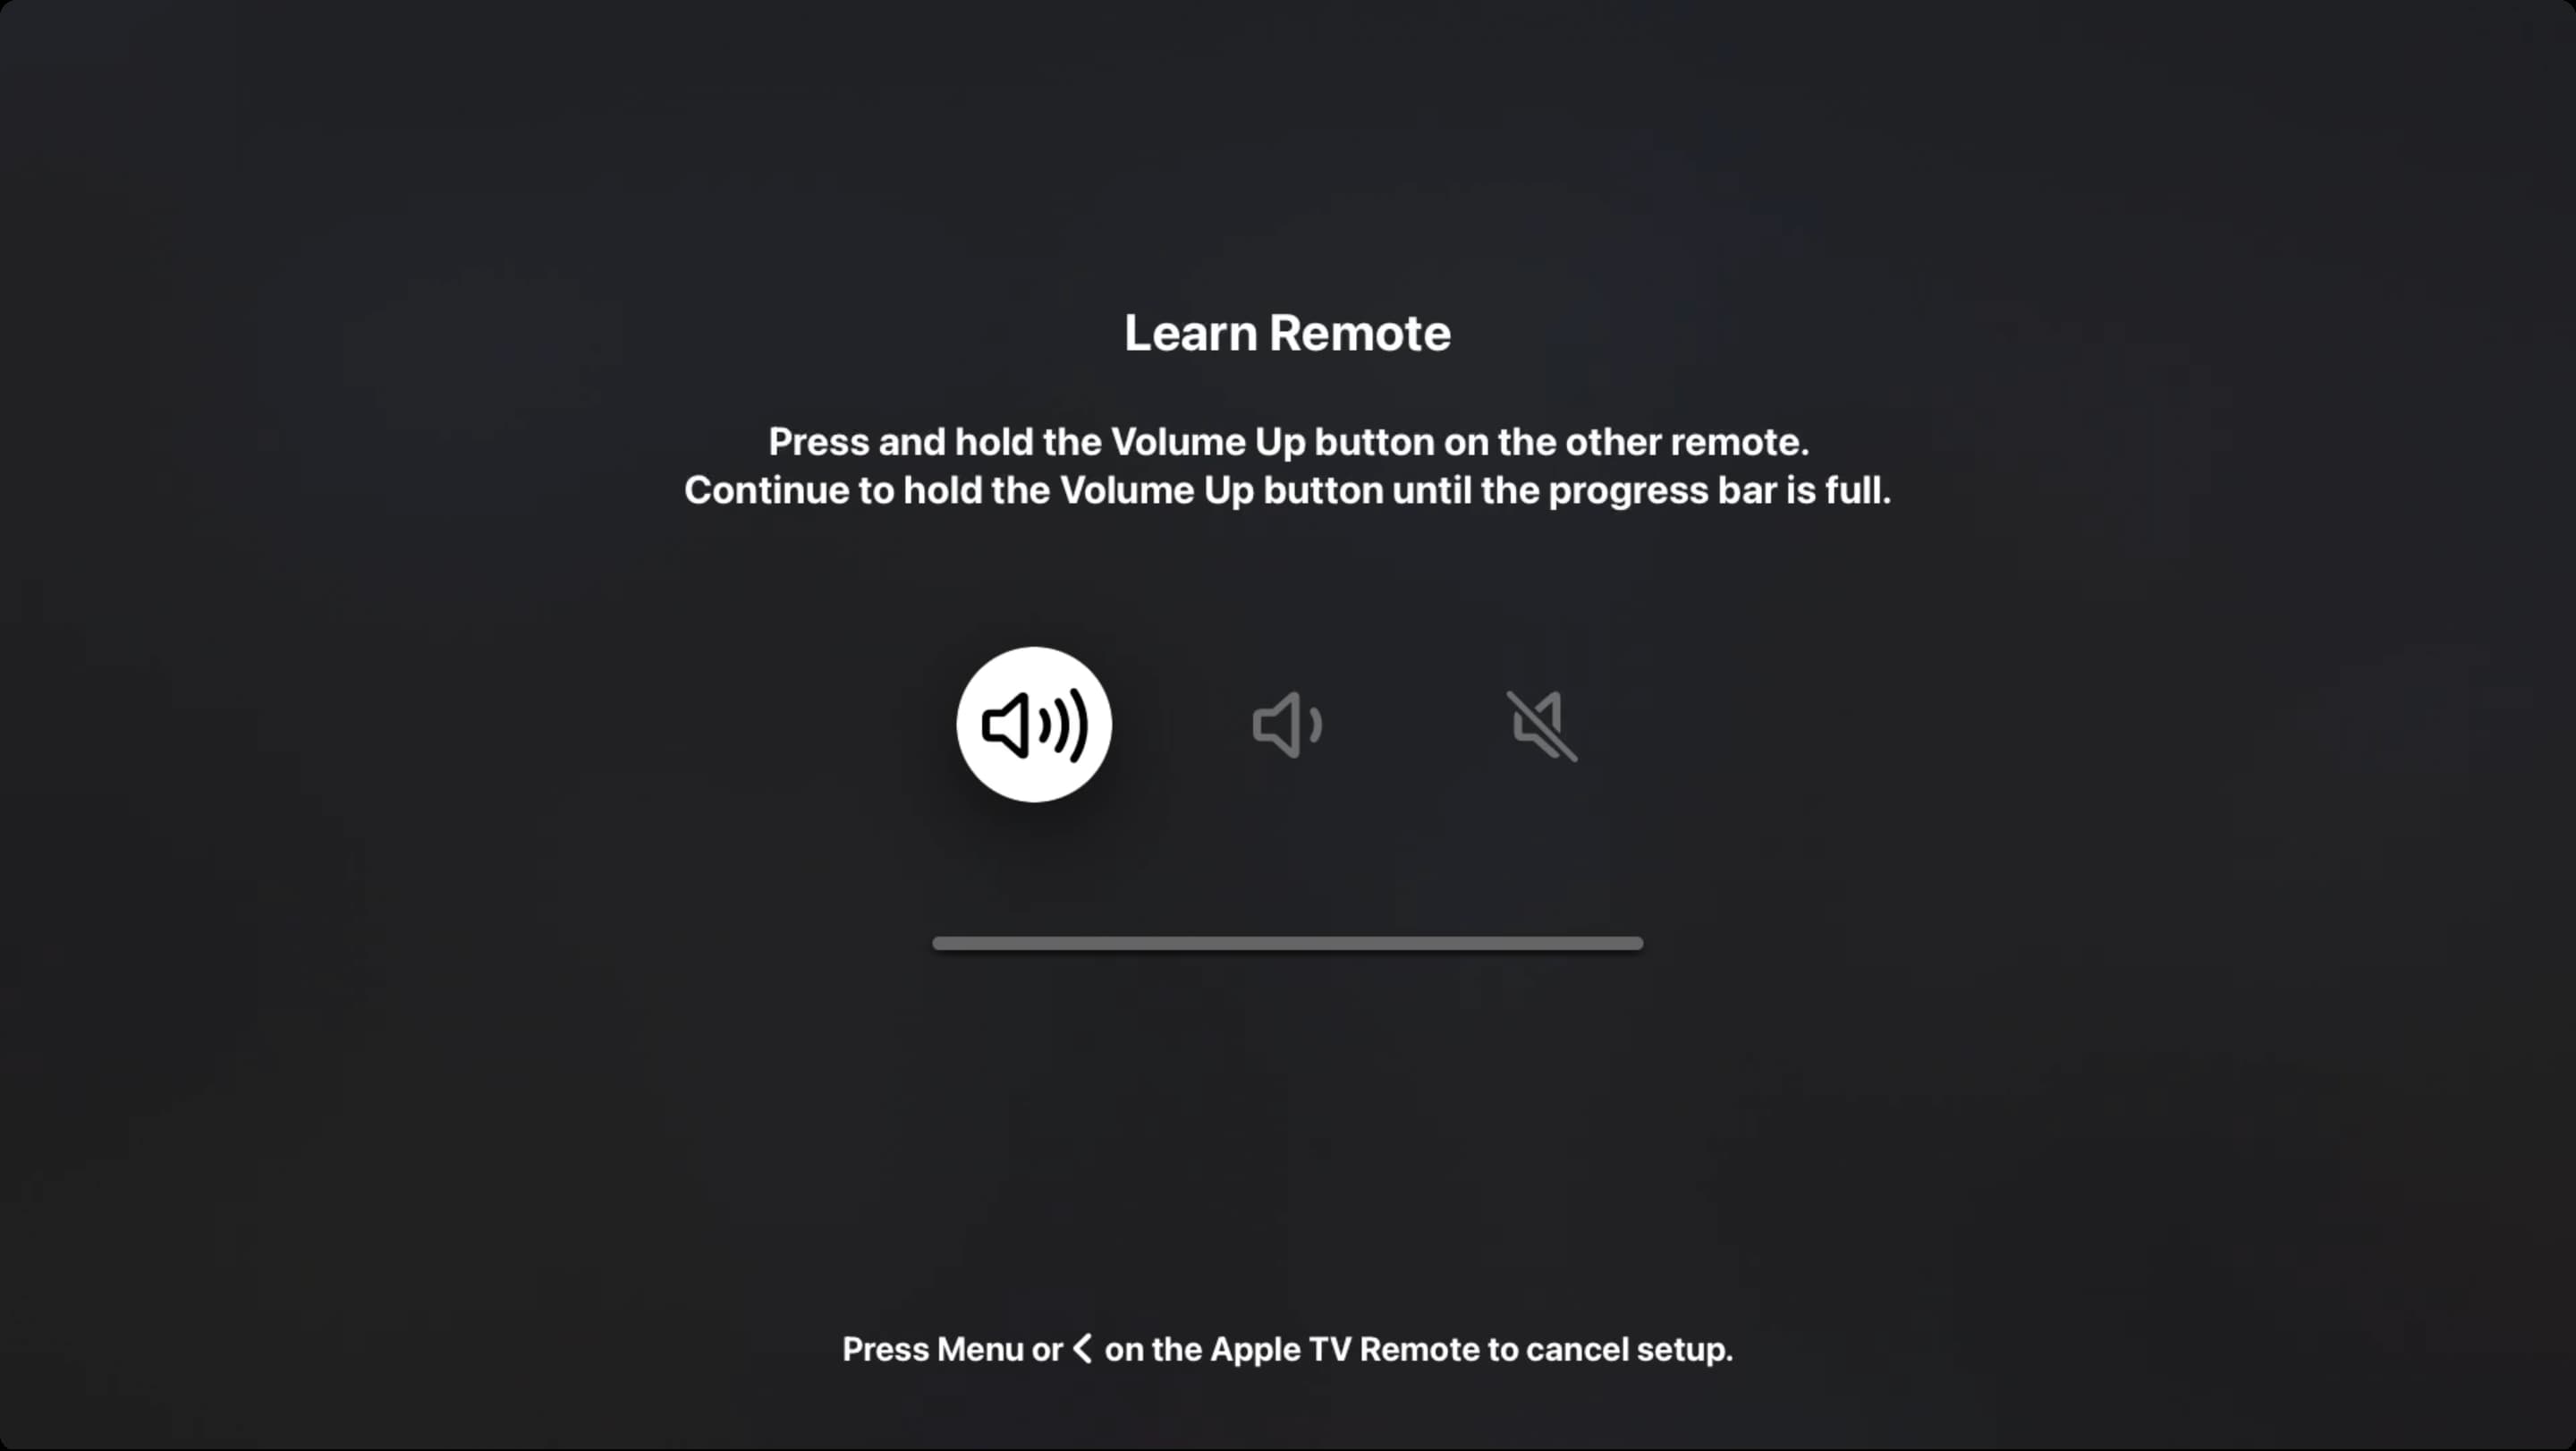 Learn Remote feature on Apple TV